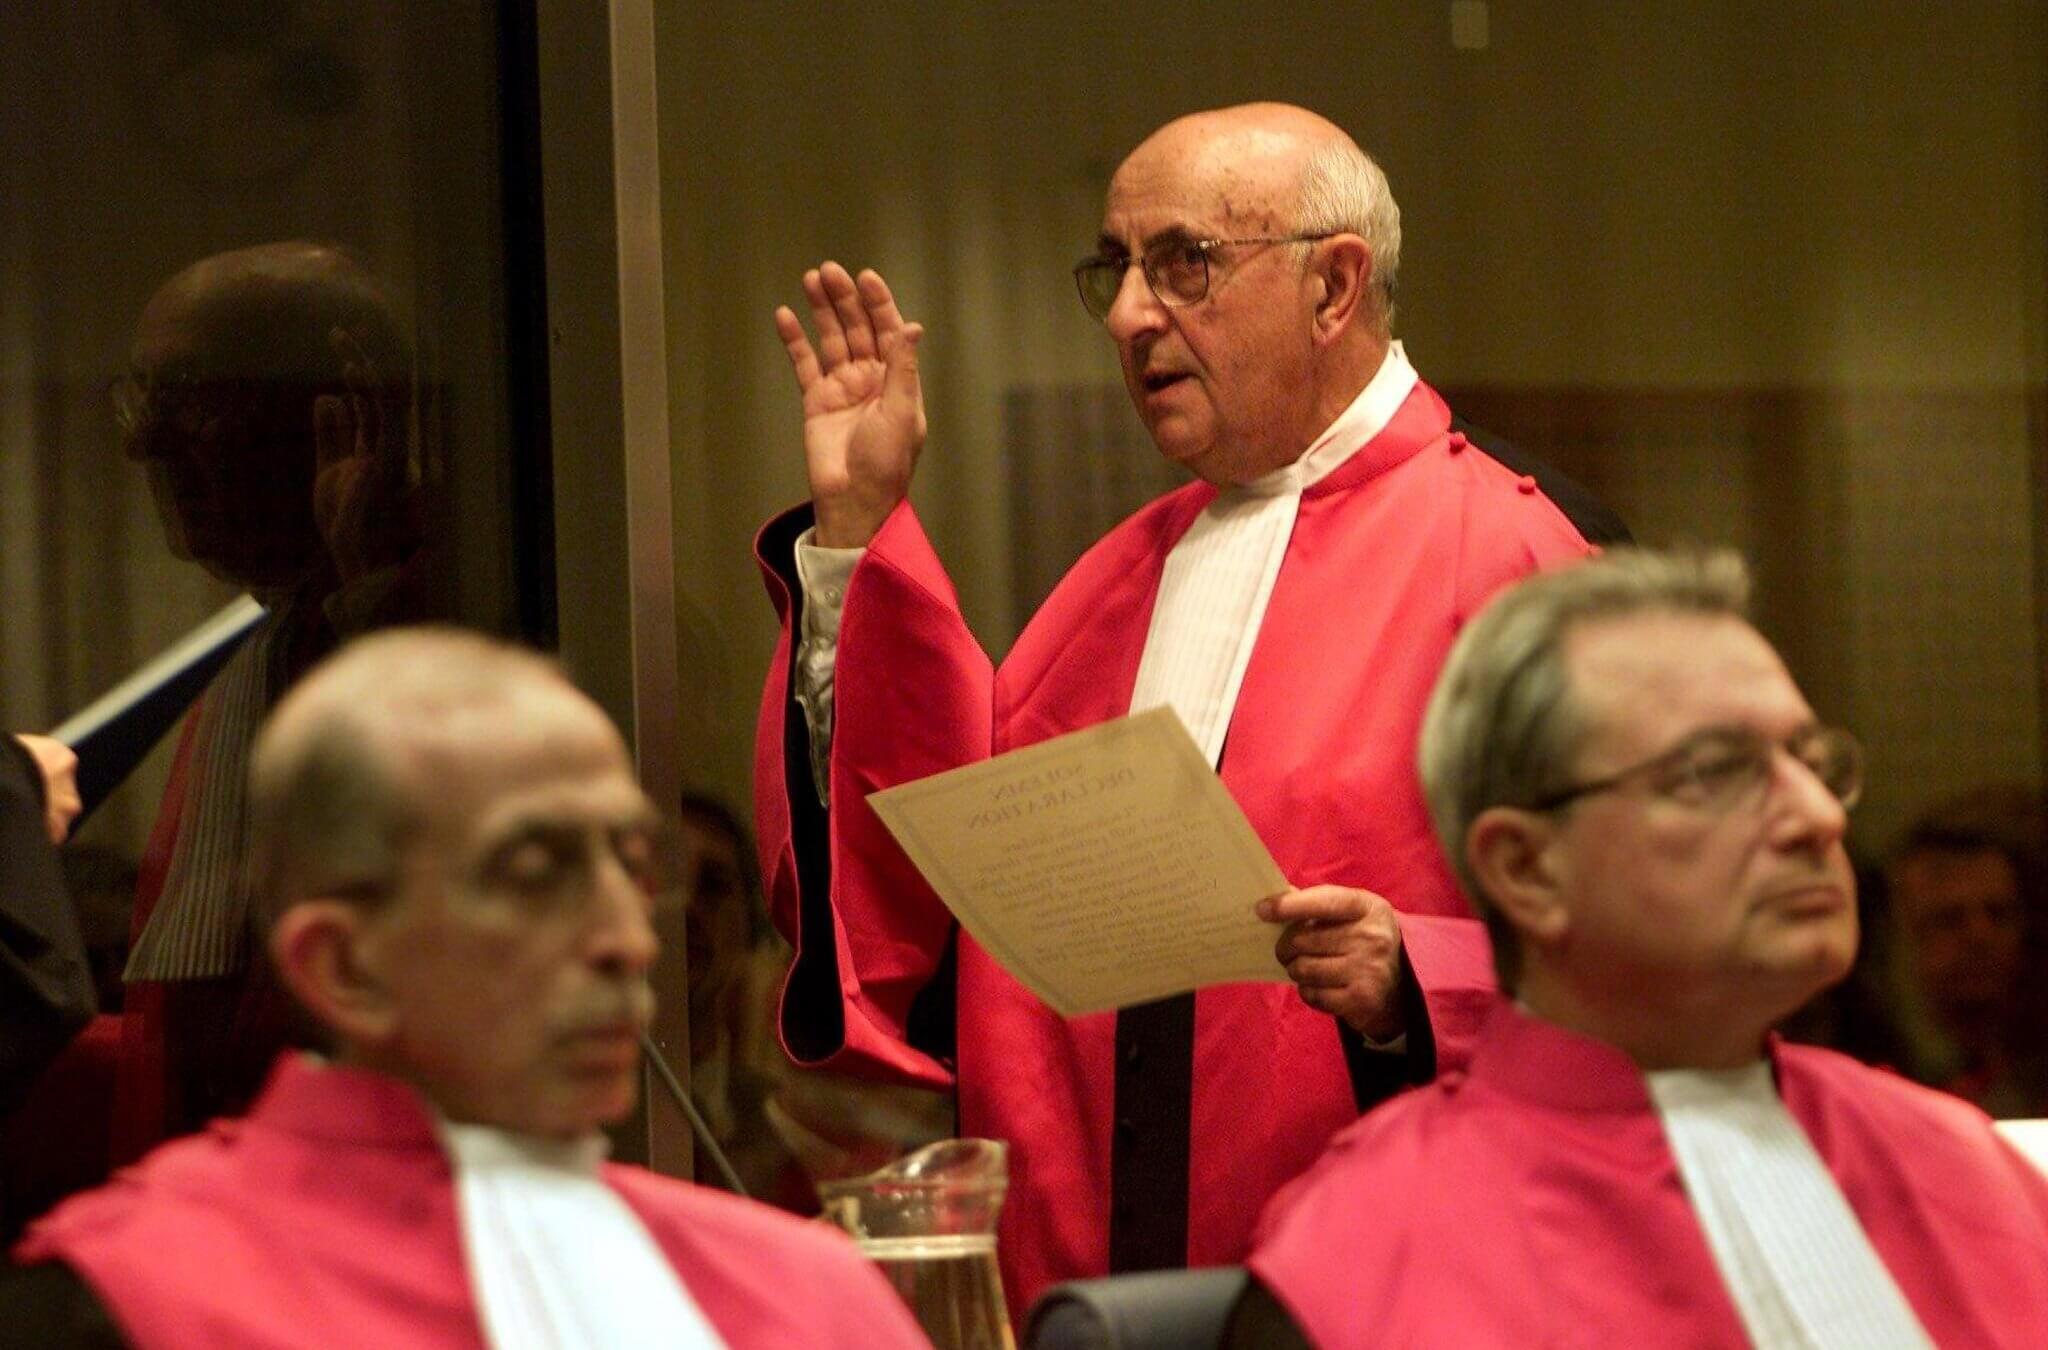 American judge Theodor Meron is sworn in as a judge by the United Nations international war crimes tribunal in The Hague, 2001.